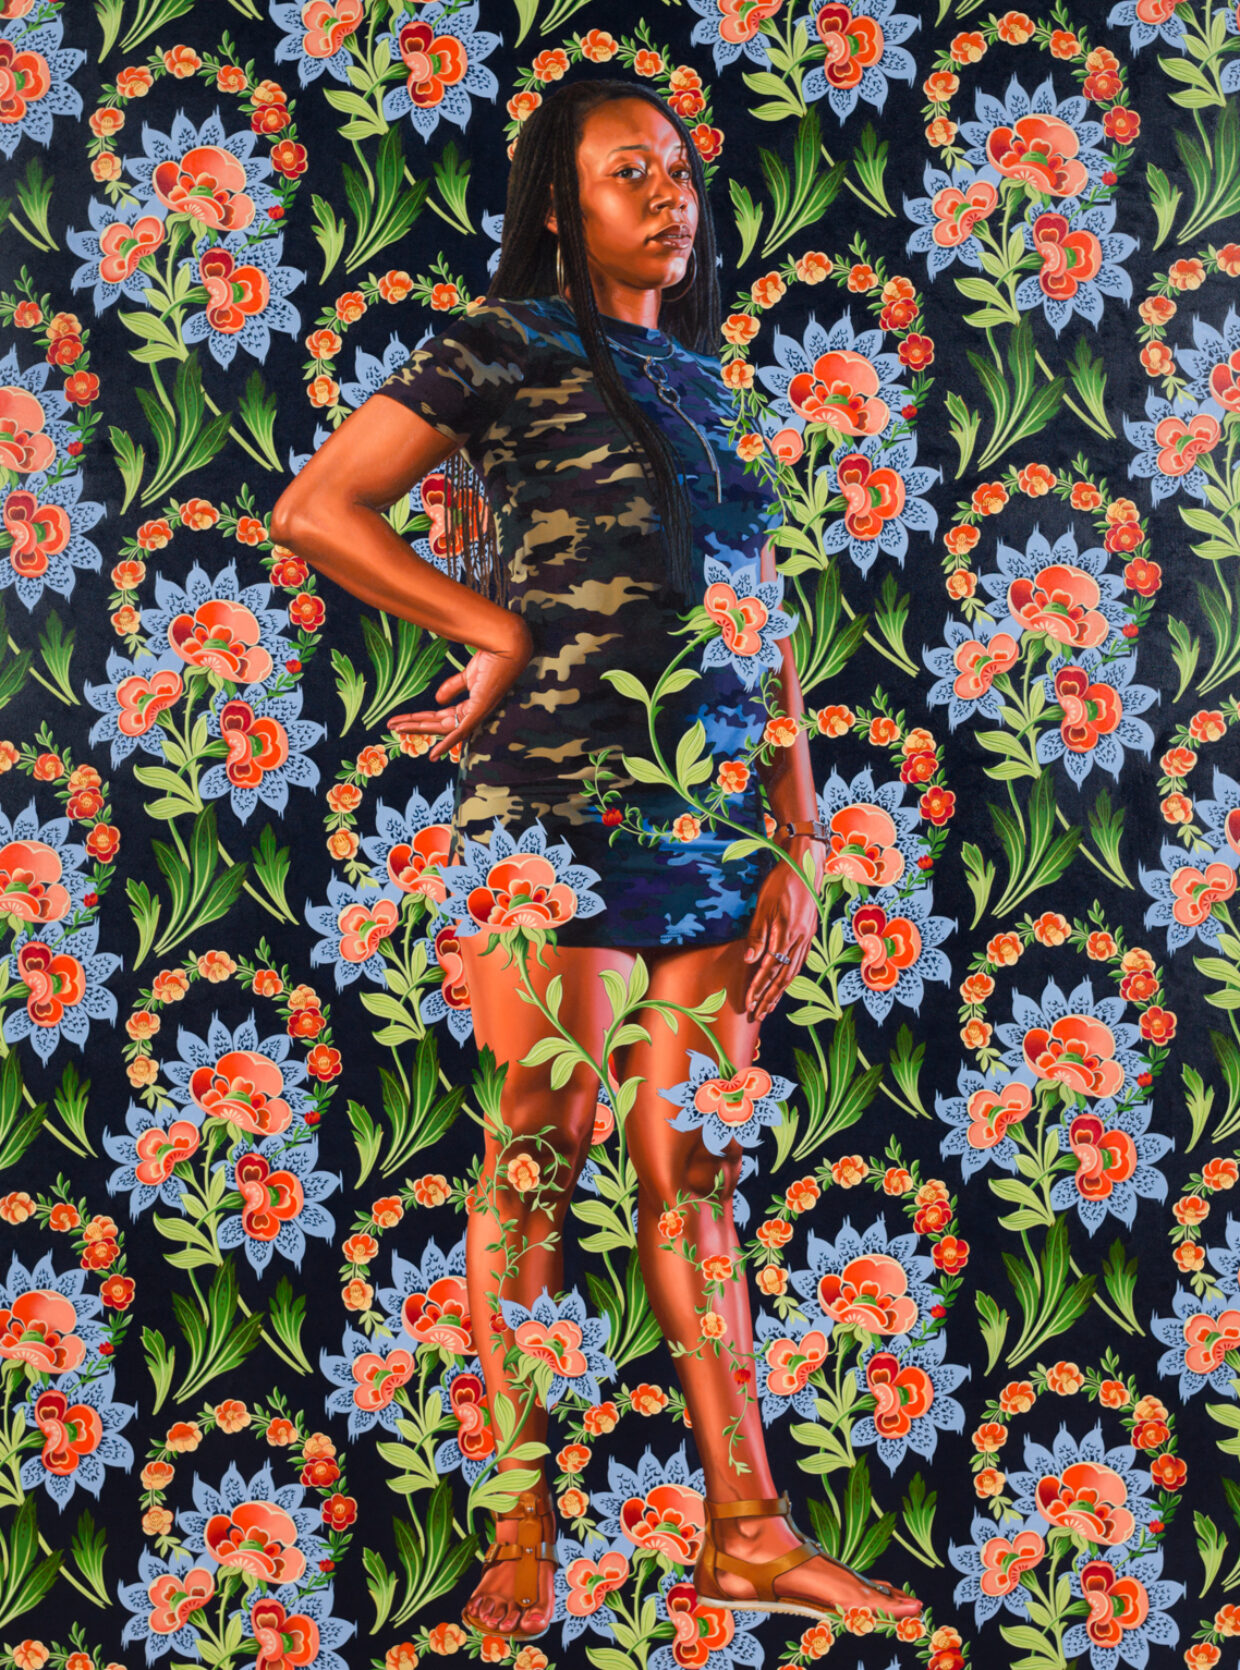 Kehinde Wiley: ‘When I first started painting black women, it was a return home’ | 3